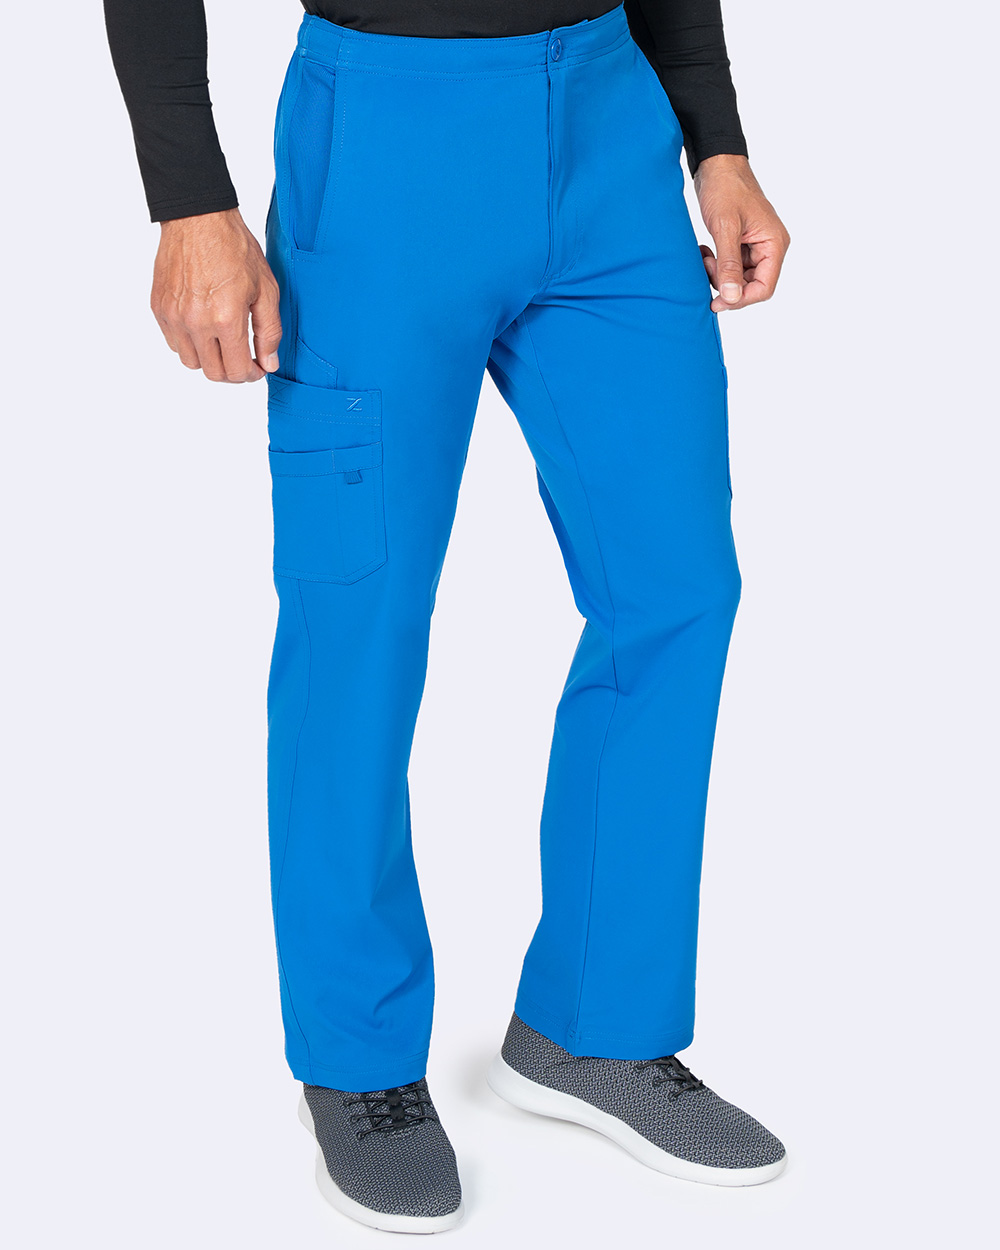 Ava Therese Men's Cargo Pant